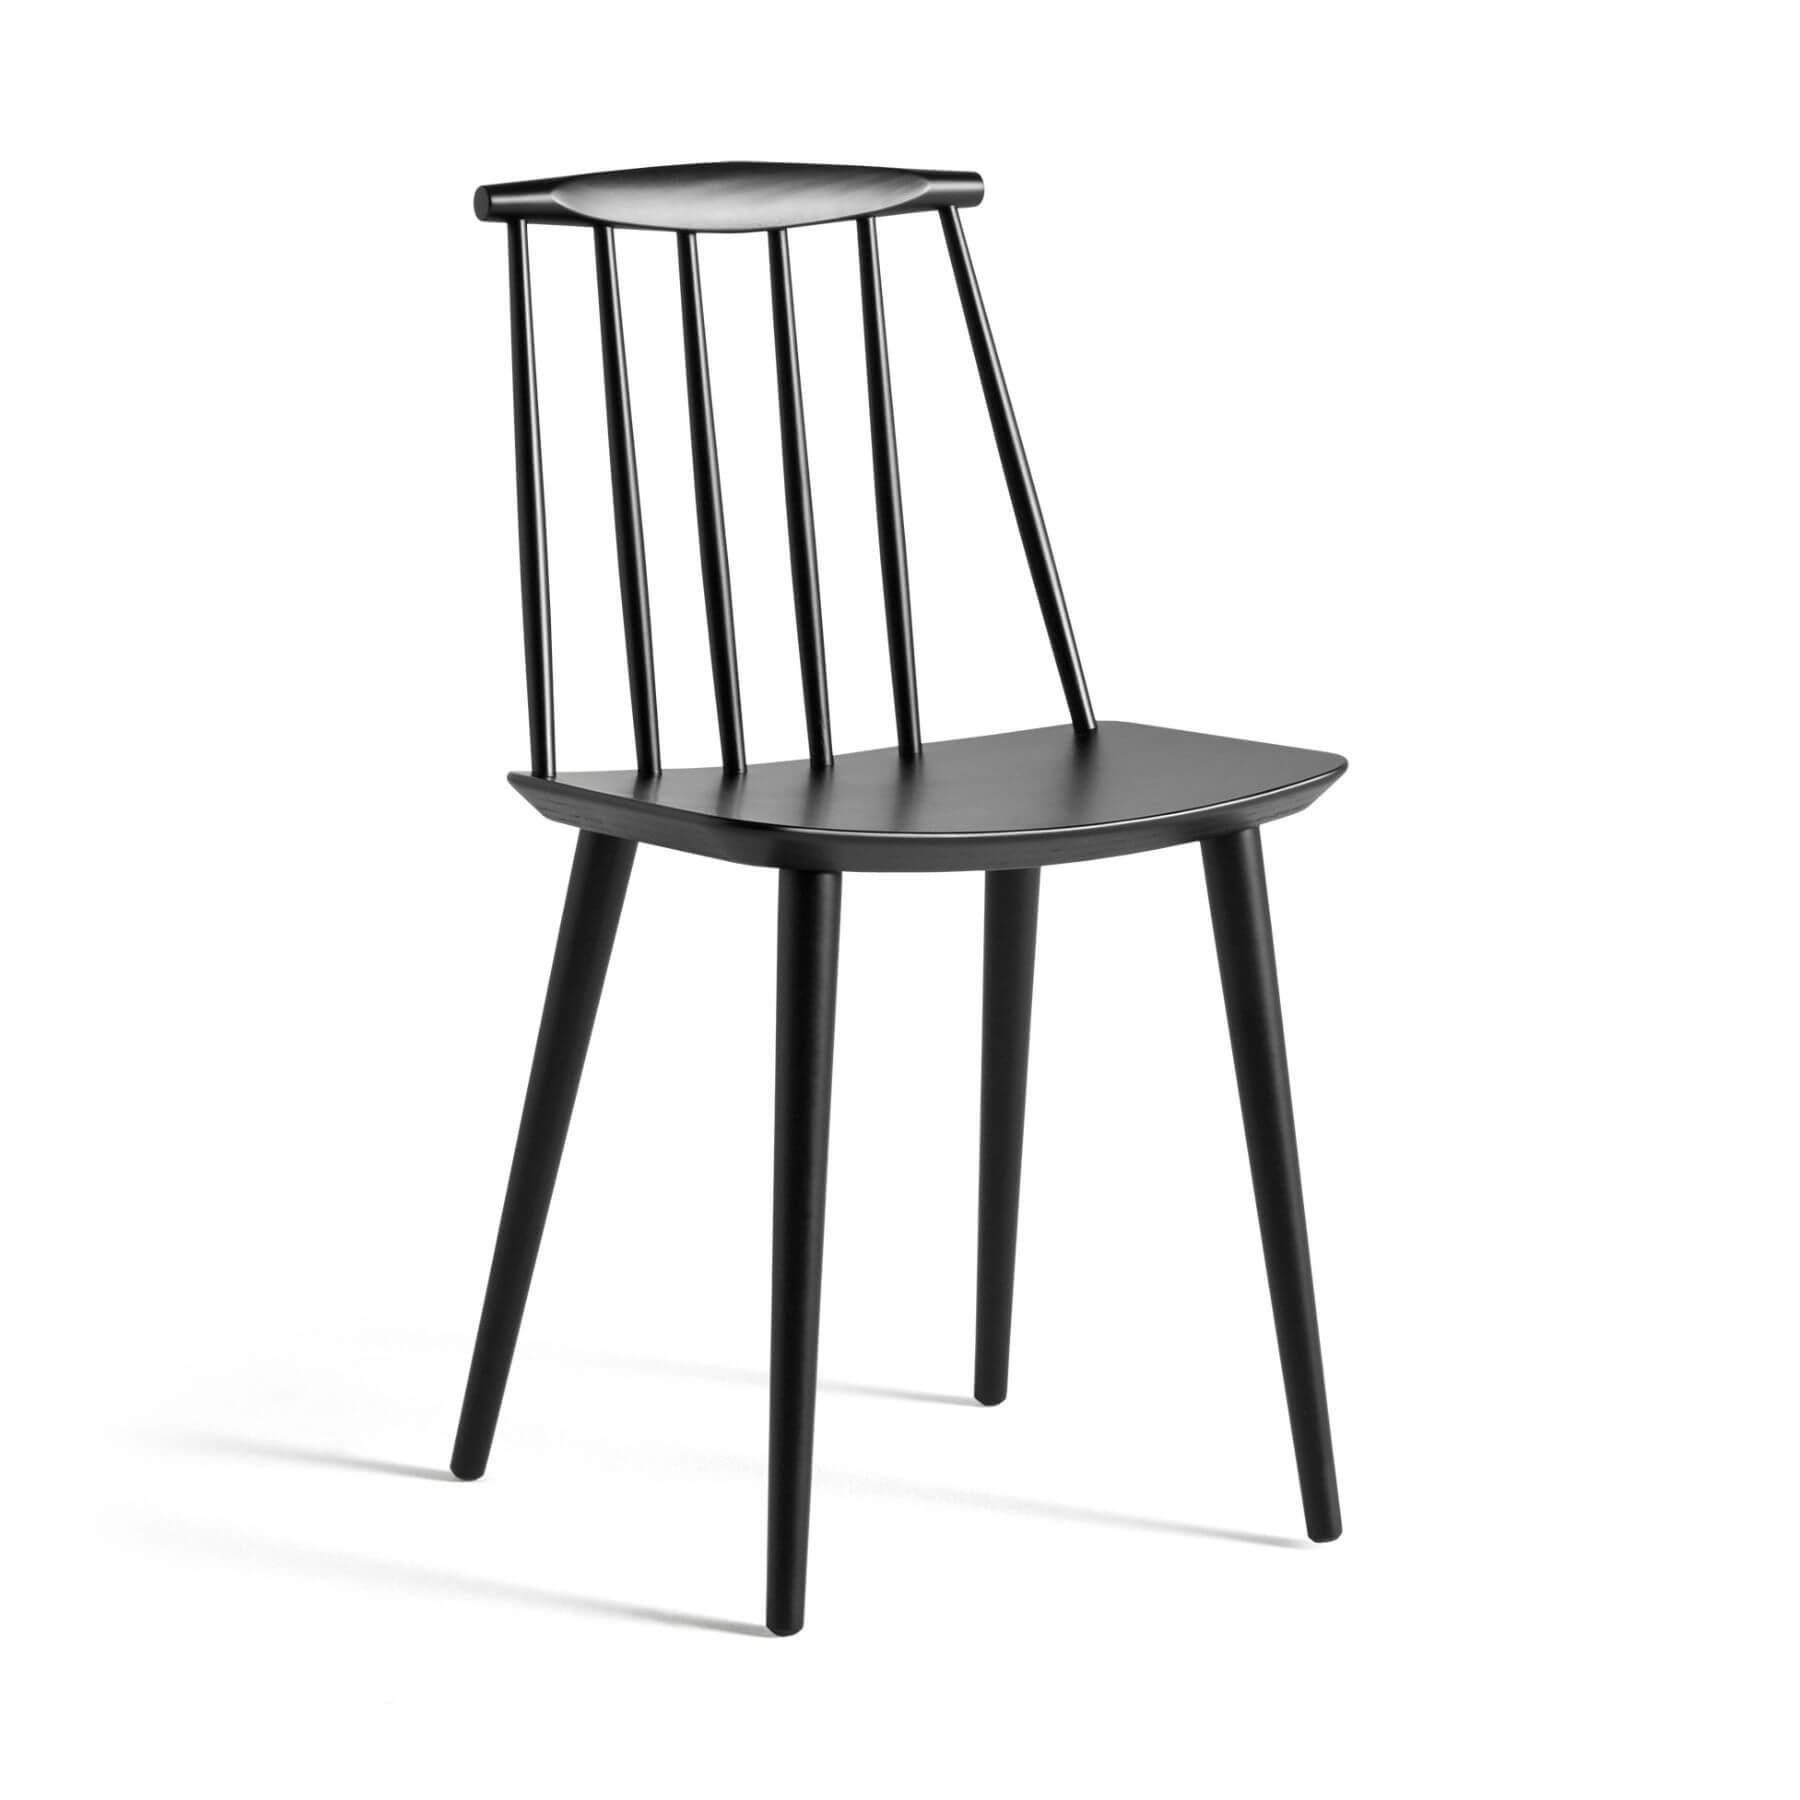 Hay Jseries 77 Dining Chair Beech Lacquered Black Felt Gliders Designer Furniture From Holloways Of Ludlow